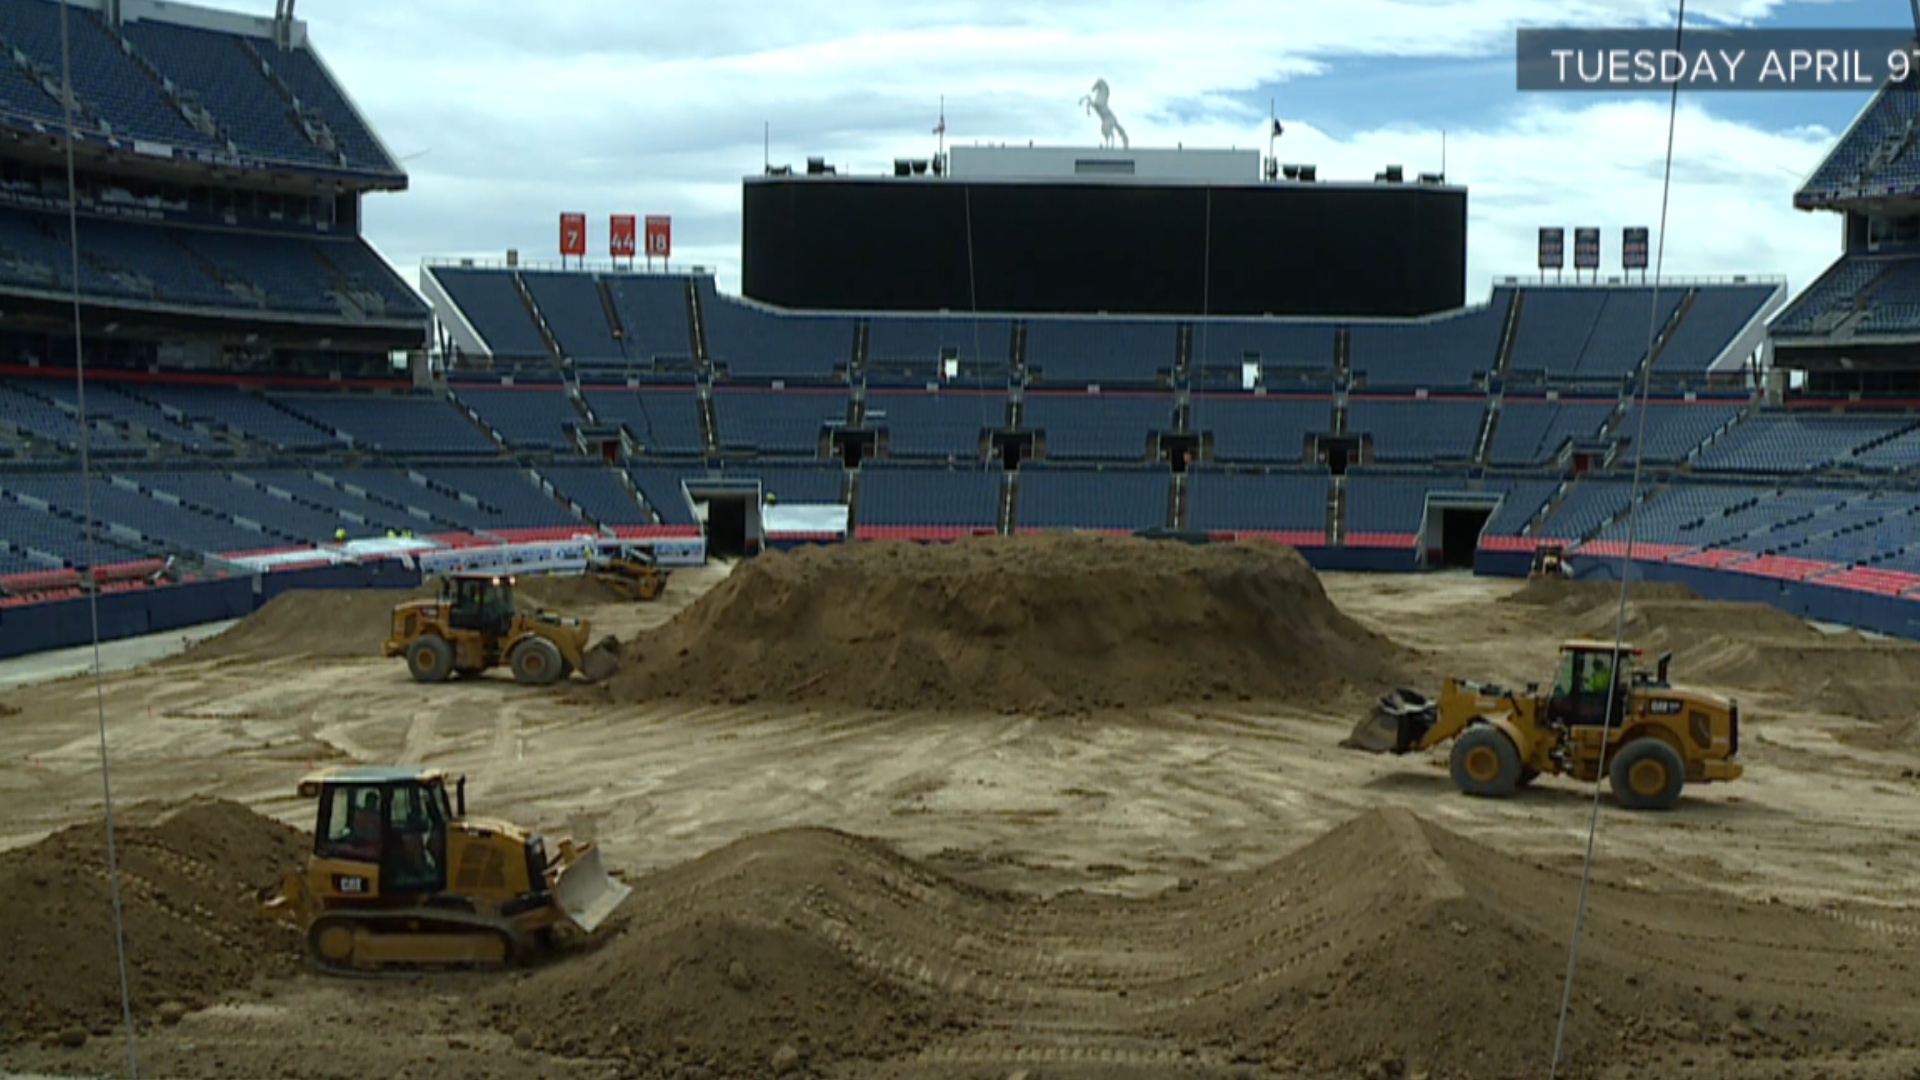 Empower Field will have a whole new look on Saturday night as the Monster Energy AMA Supercross roars into town. Airdate: 2019.